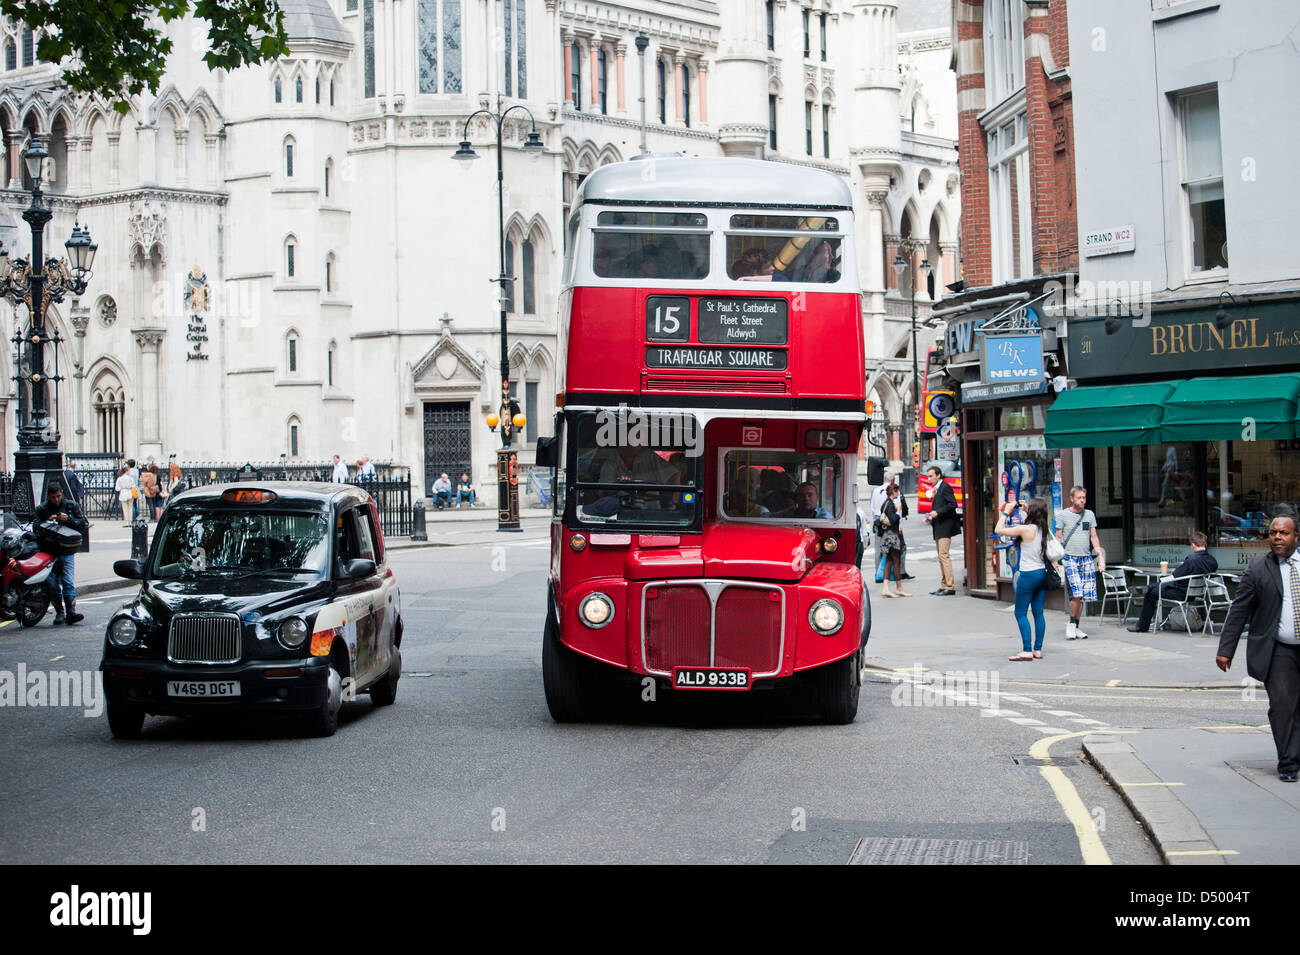 Traditionelle Londoner Routemaster Bus Route 15 am Aldwych, in der Nähe der Royal Courts of Justice, London Stockfoto